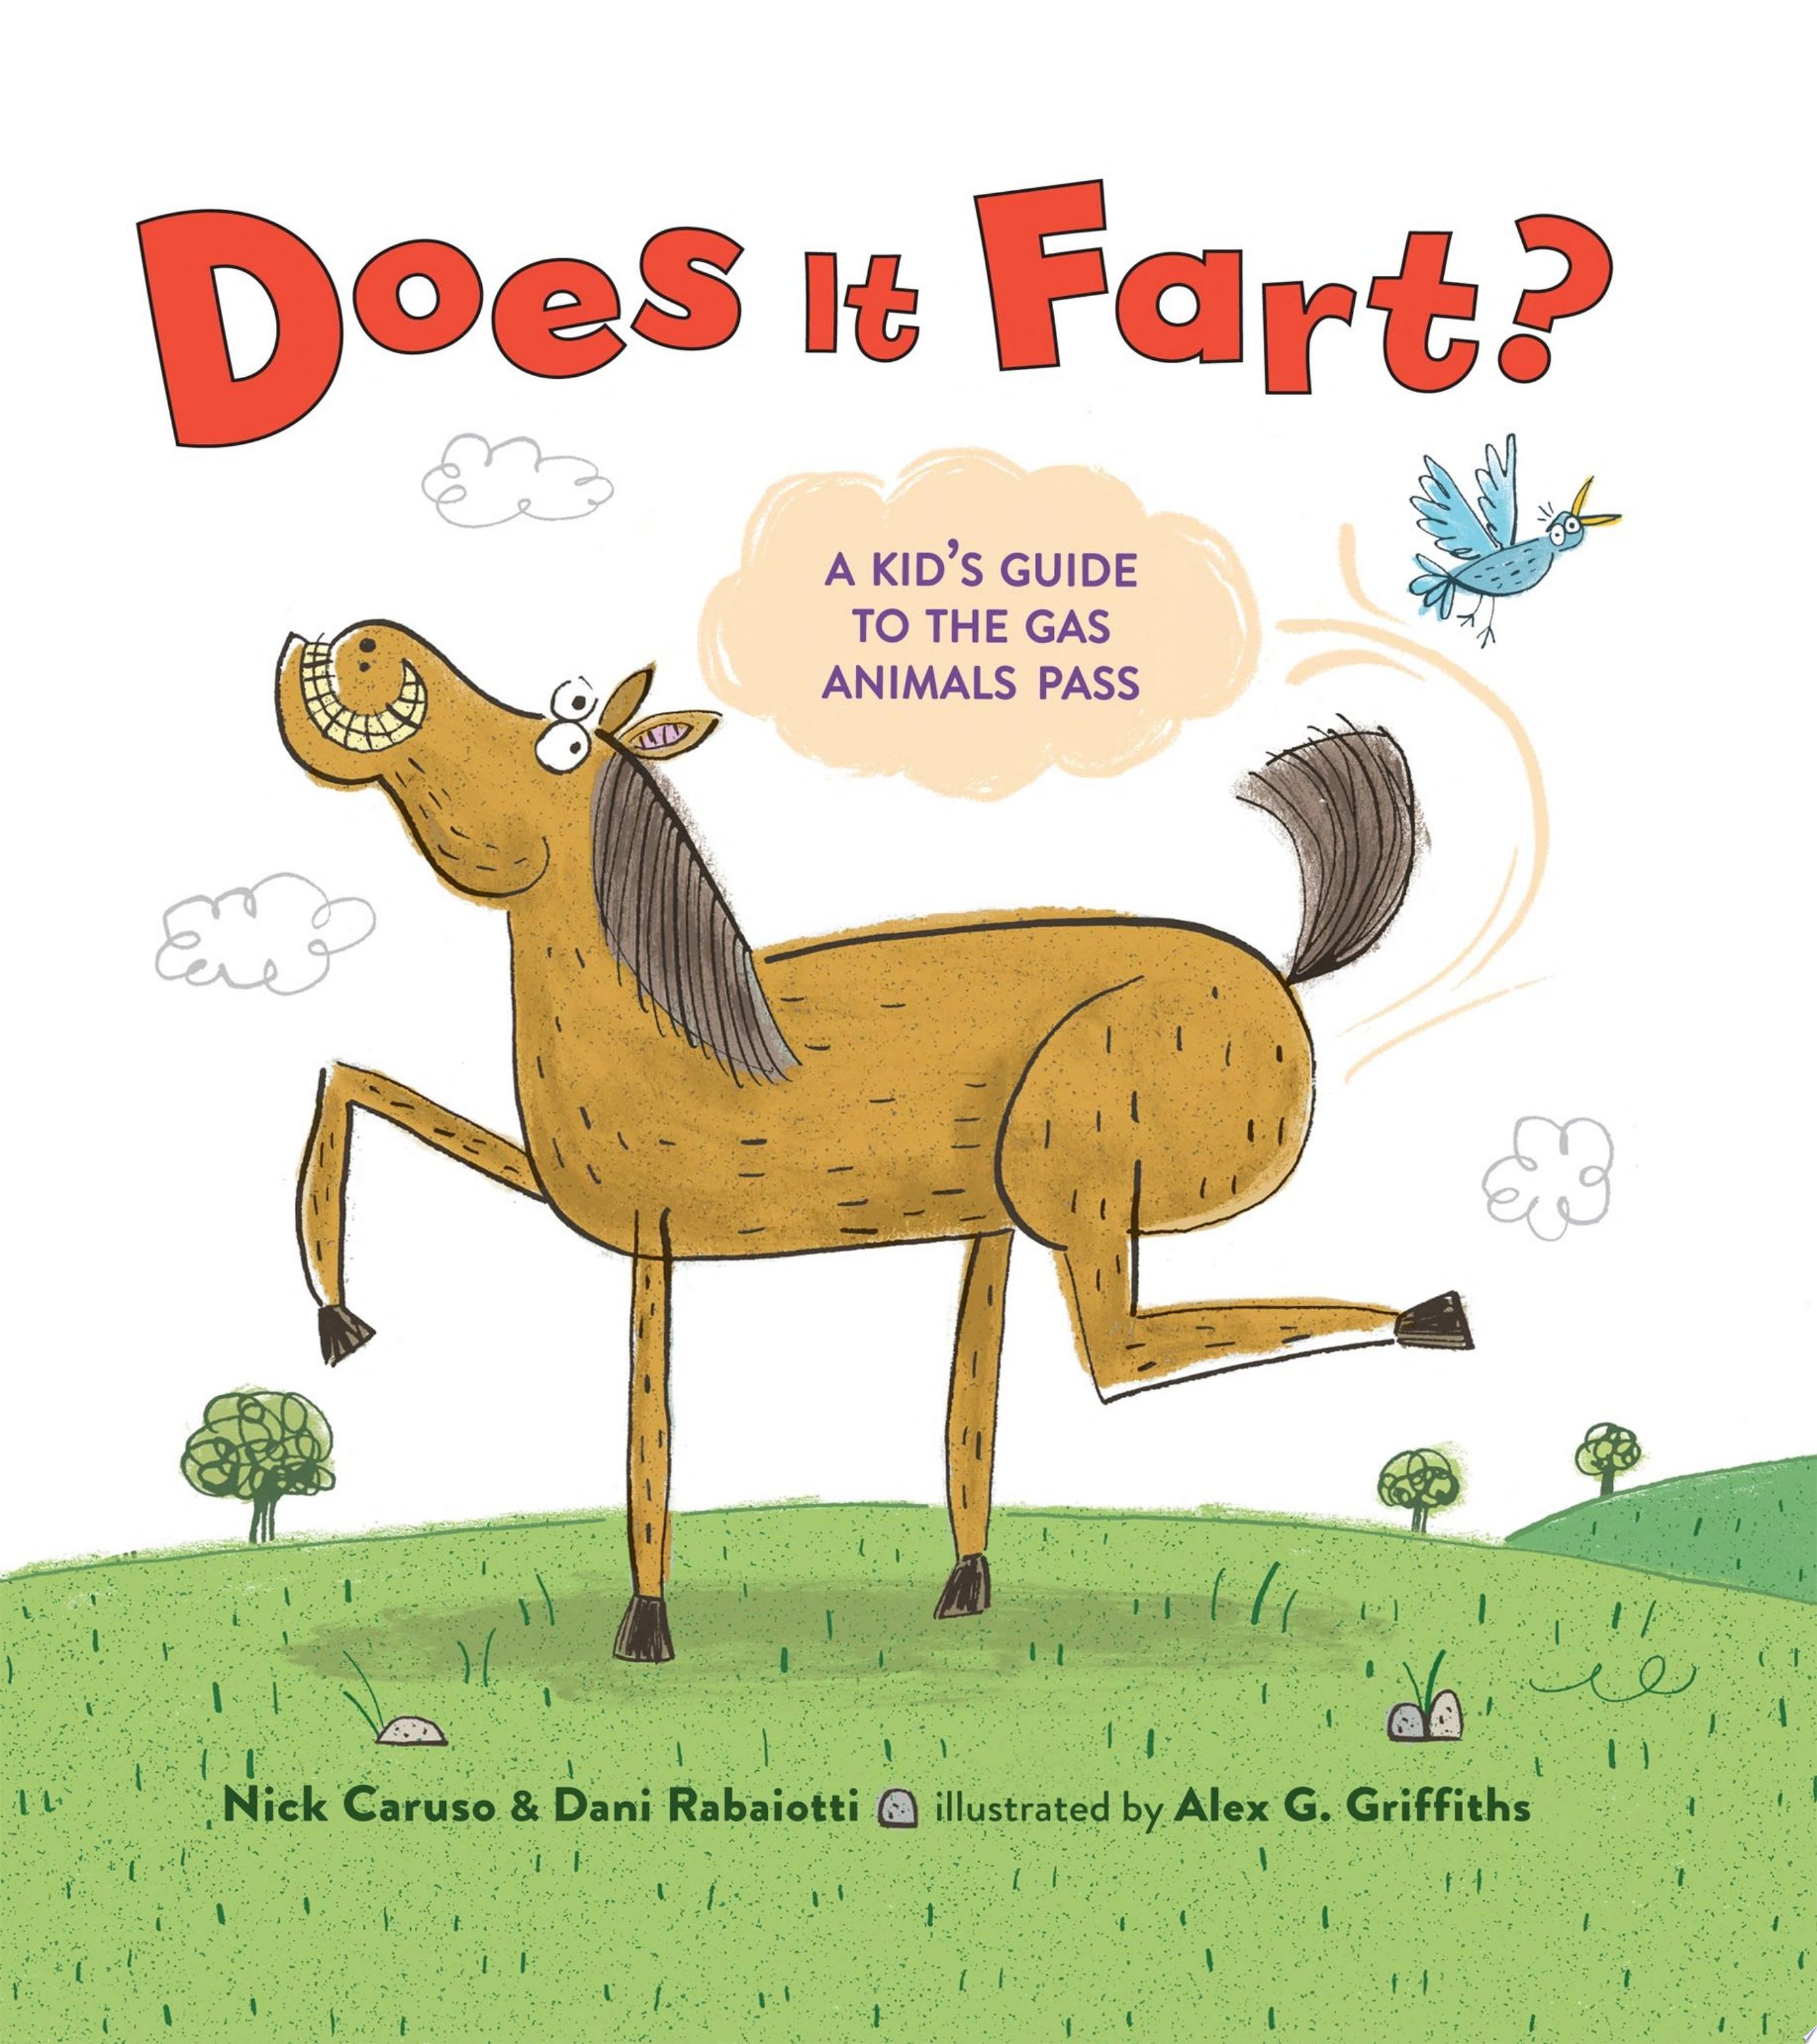 Image for "Does It Fart?"